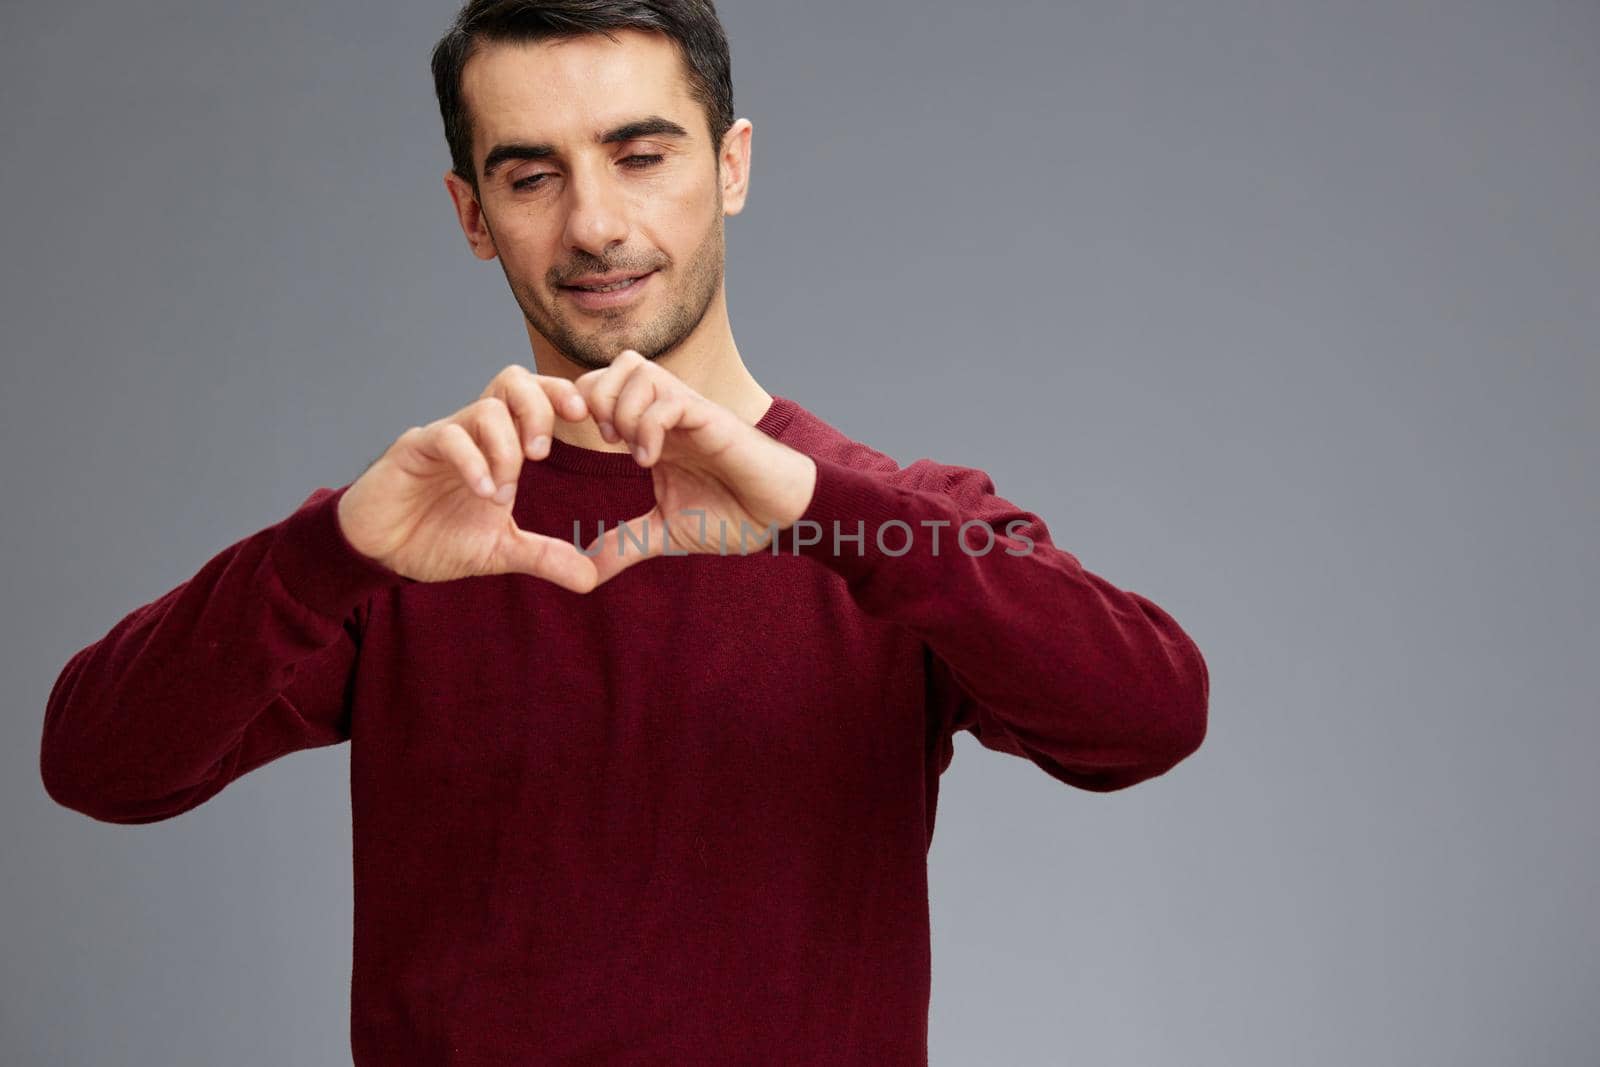 handsome man holding hands in the shape of a heart in a red sweater gesturing with hands posing. High quality photo